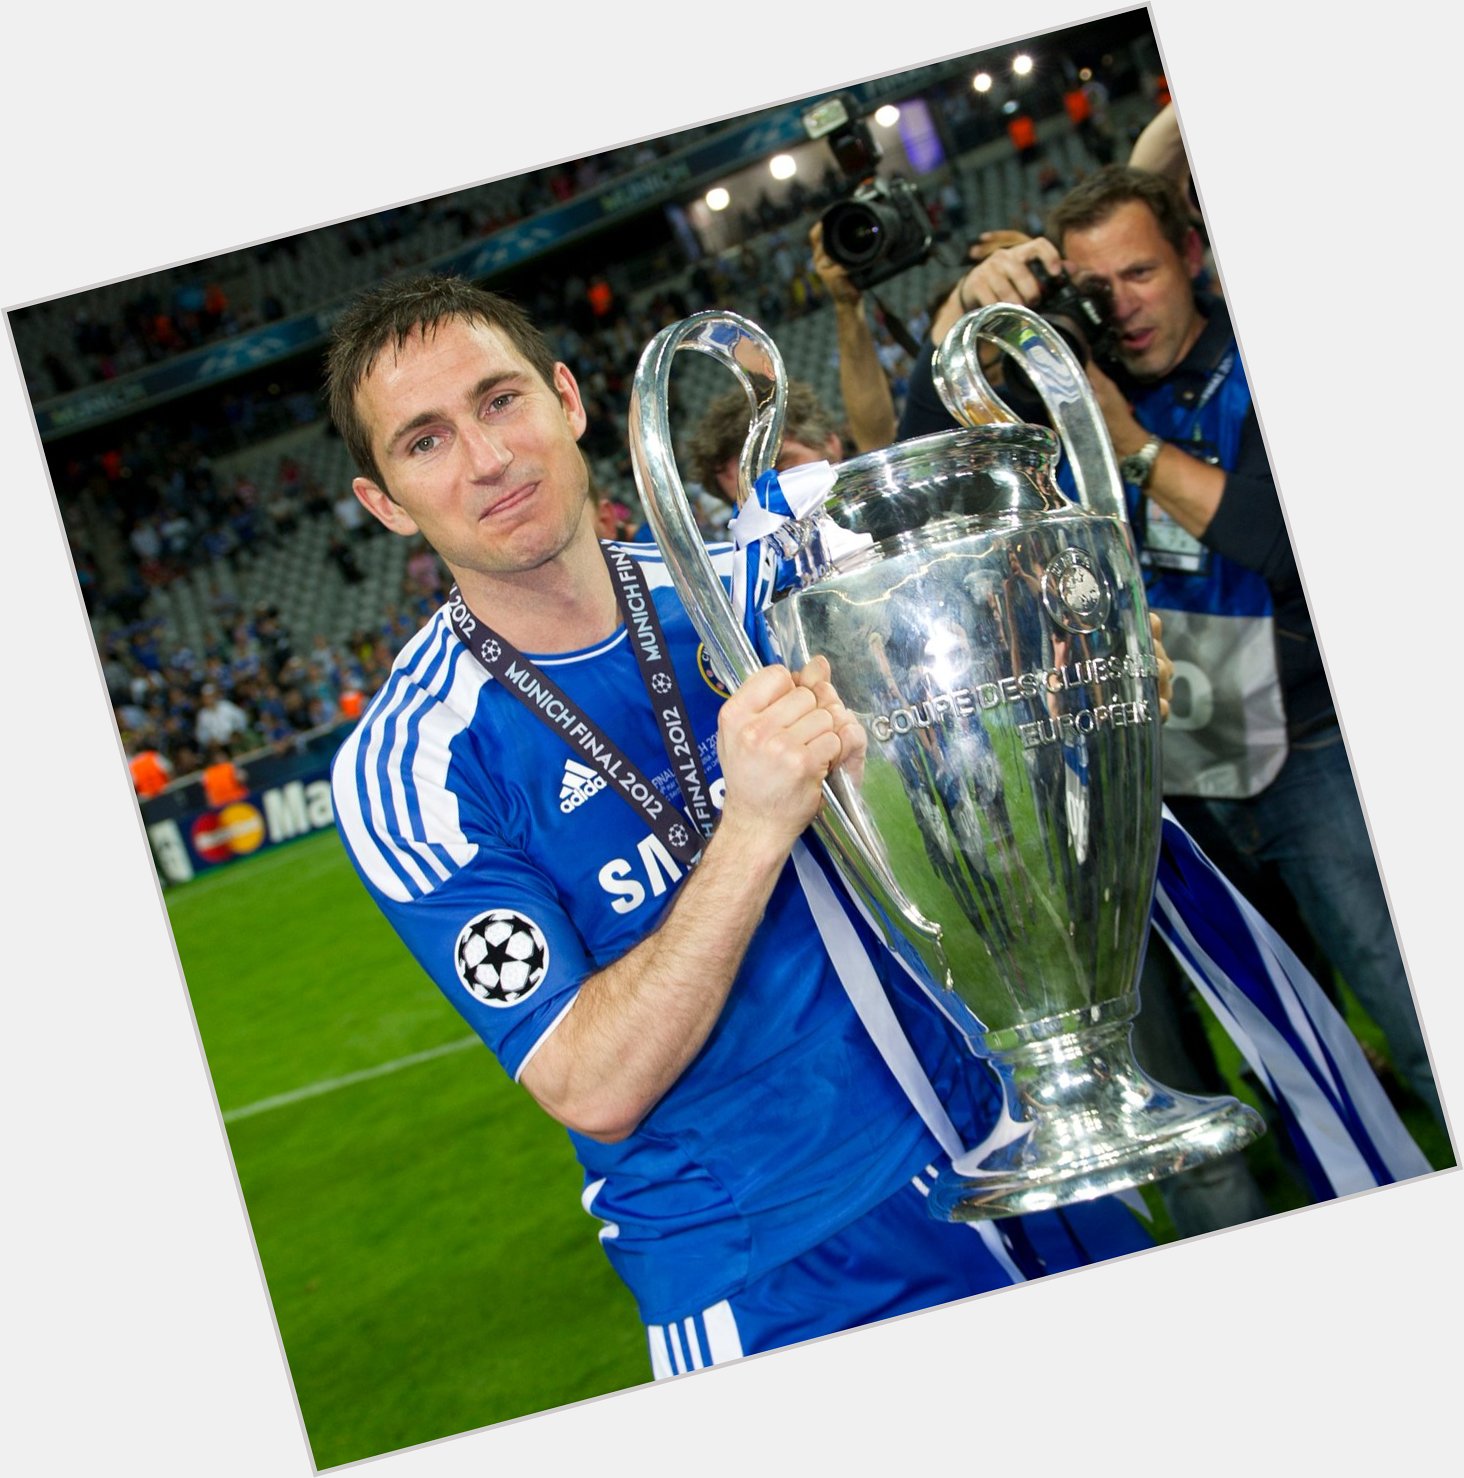 Happy birthday to a huge Chelsea legend, Super Frank Lampard! 